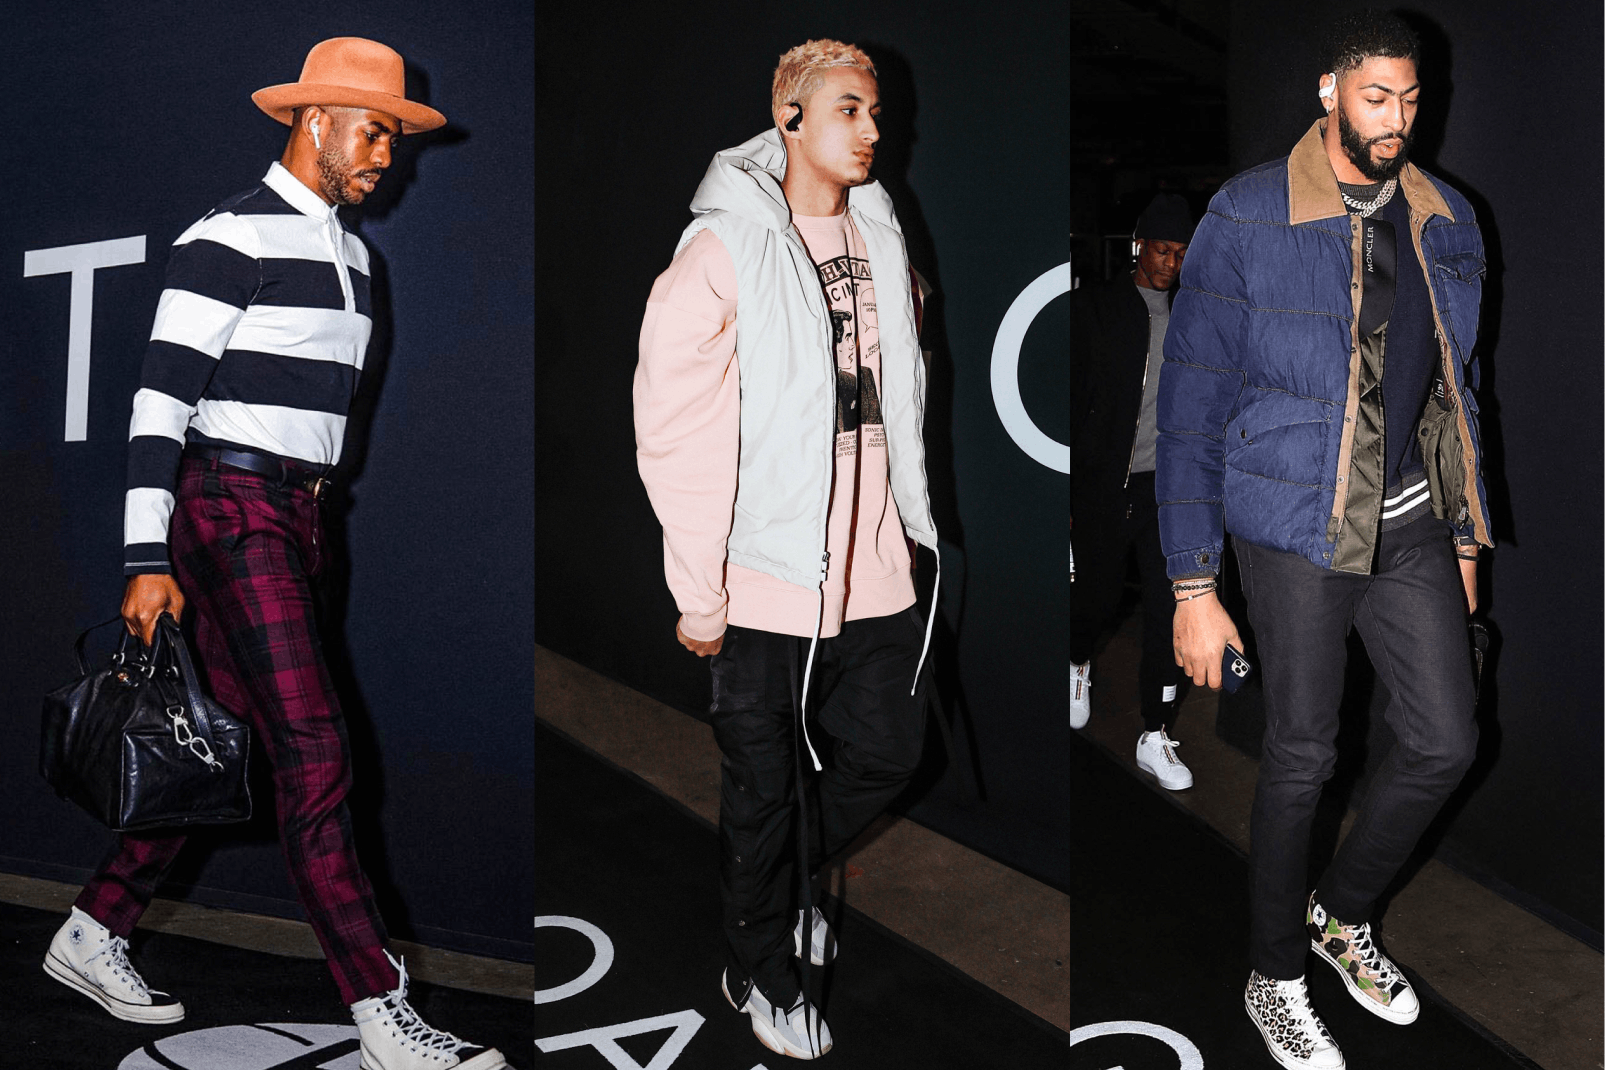 Athlete style: How arena entrance has become fashion show runway